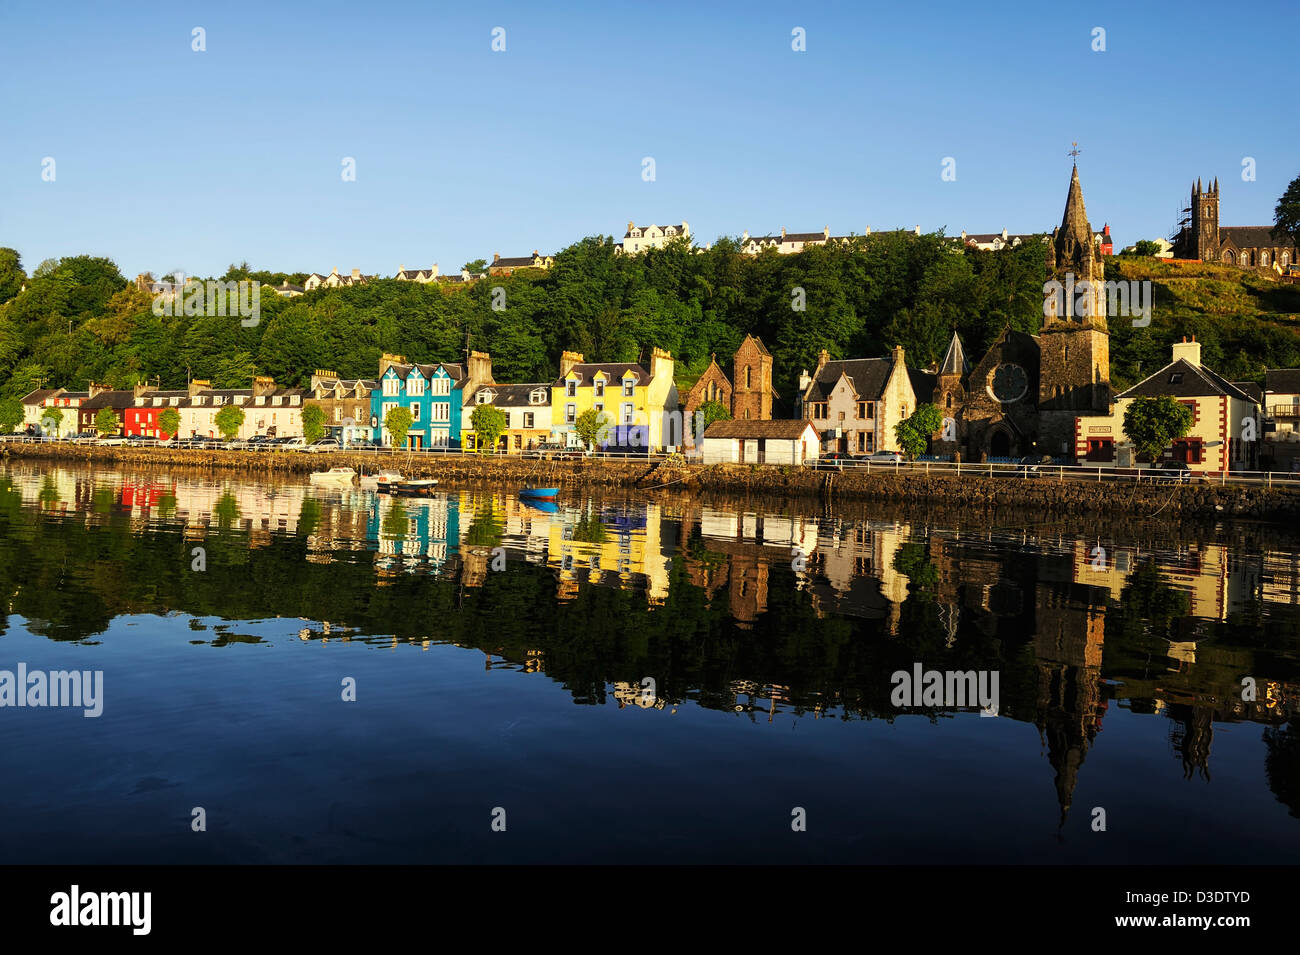 colorful view of tobermory glowing in the morning sun, mull, scotland Stock Photo